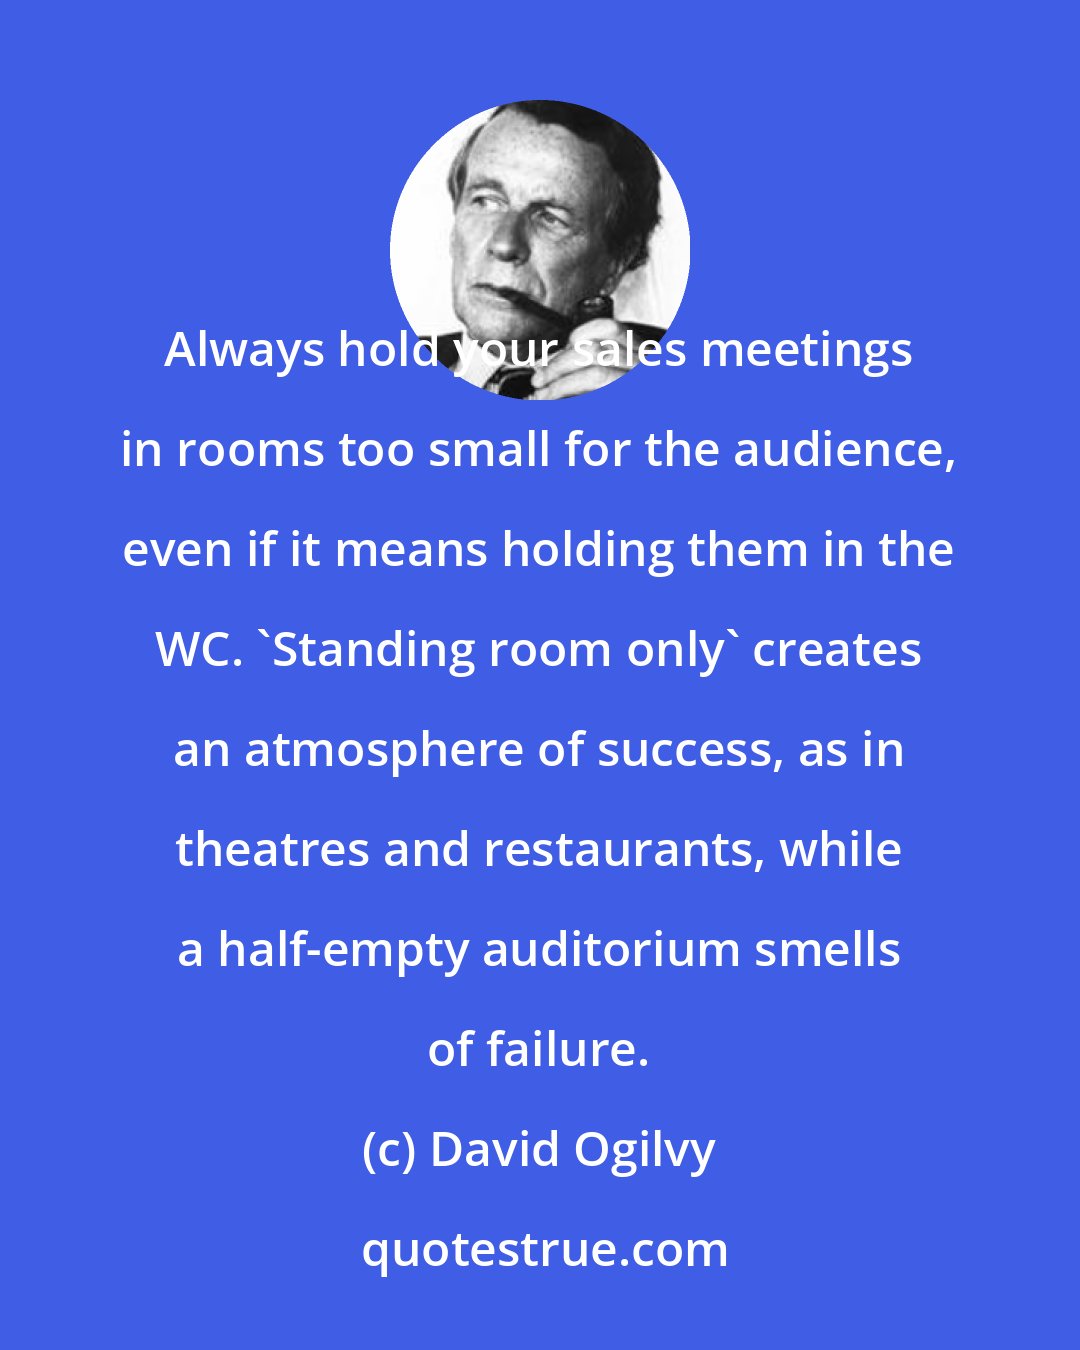 David Ogilvy: Always hold your sales meetings in rooms too small for the audience, even if it means holding them in the WC. 'Standing room only' creates an atmosphere of success, as in theatres and restaurants, while a half-empty auditorium smells of failure.